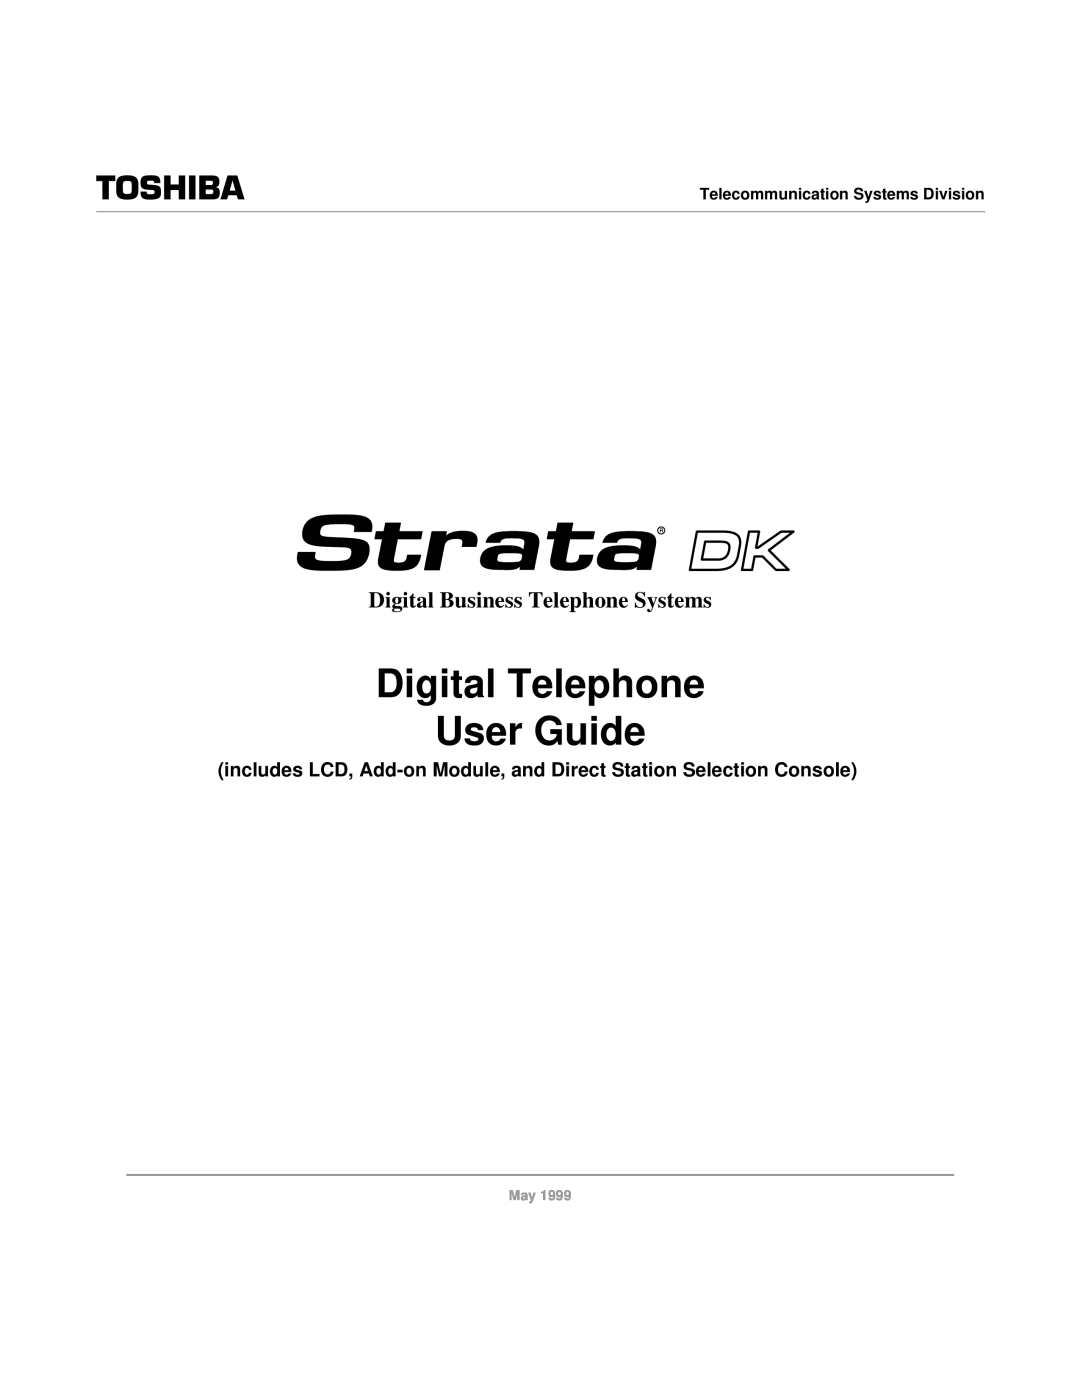 Toshiba CT manual includes LCD, Add-on Module, and Direct Station Selection Console, Digital Telephone User Guide 